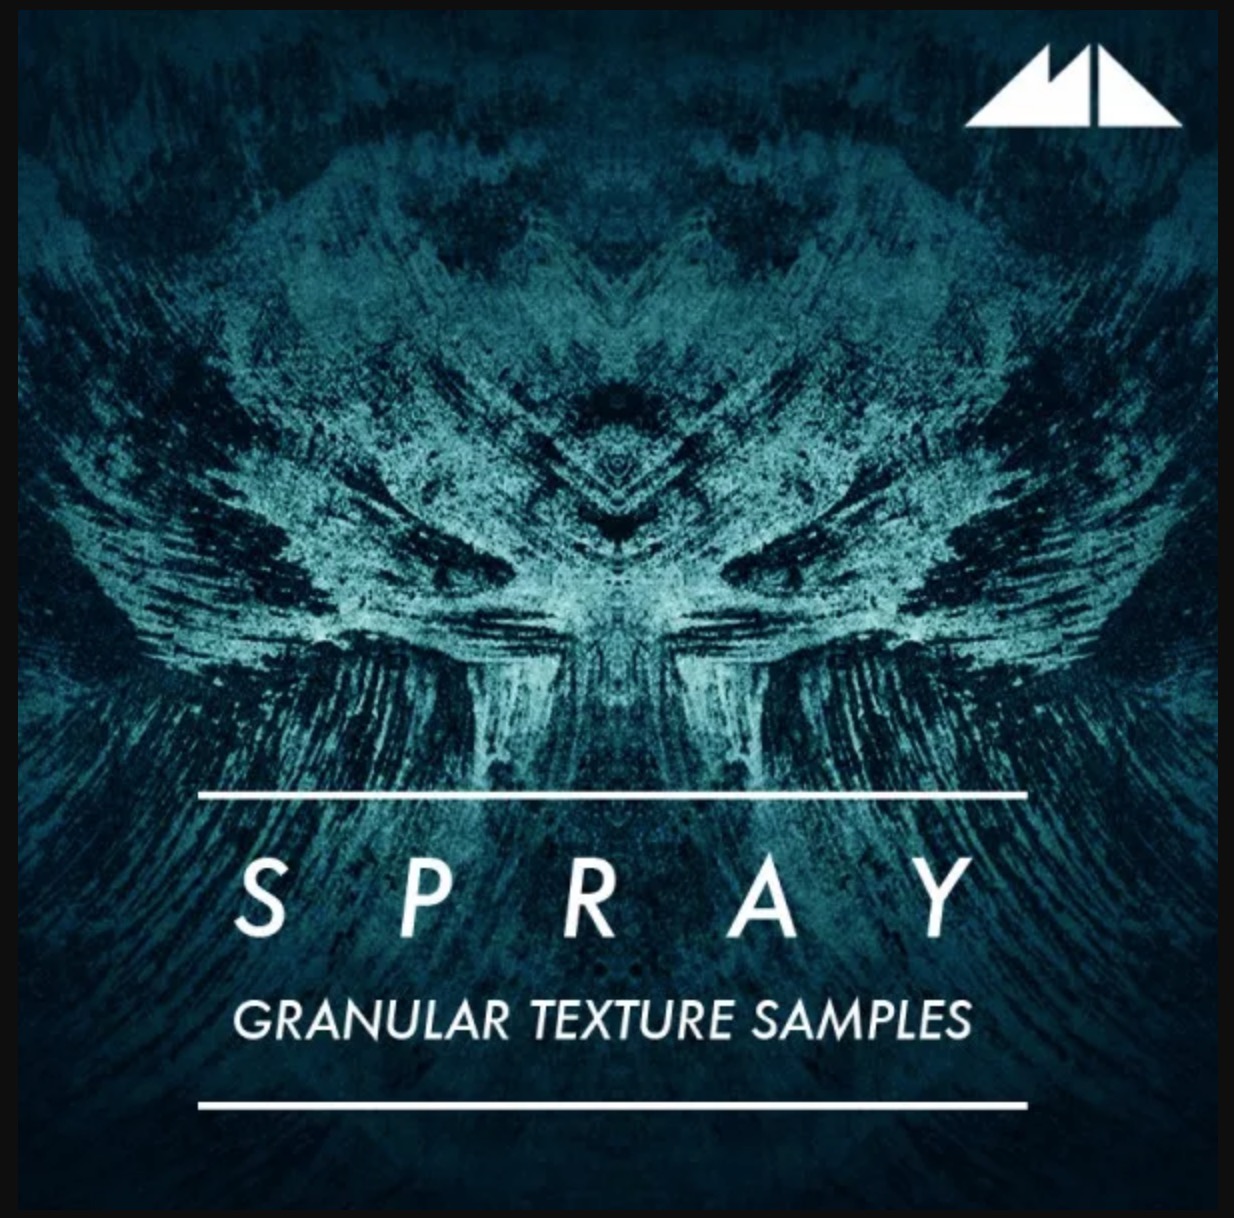 Spray Granular Texture Samples by ModeAudio Review